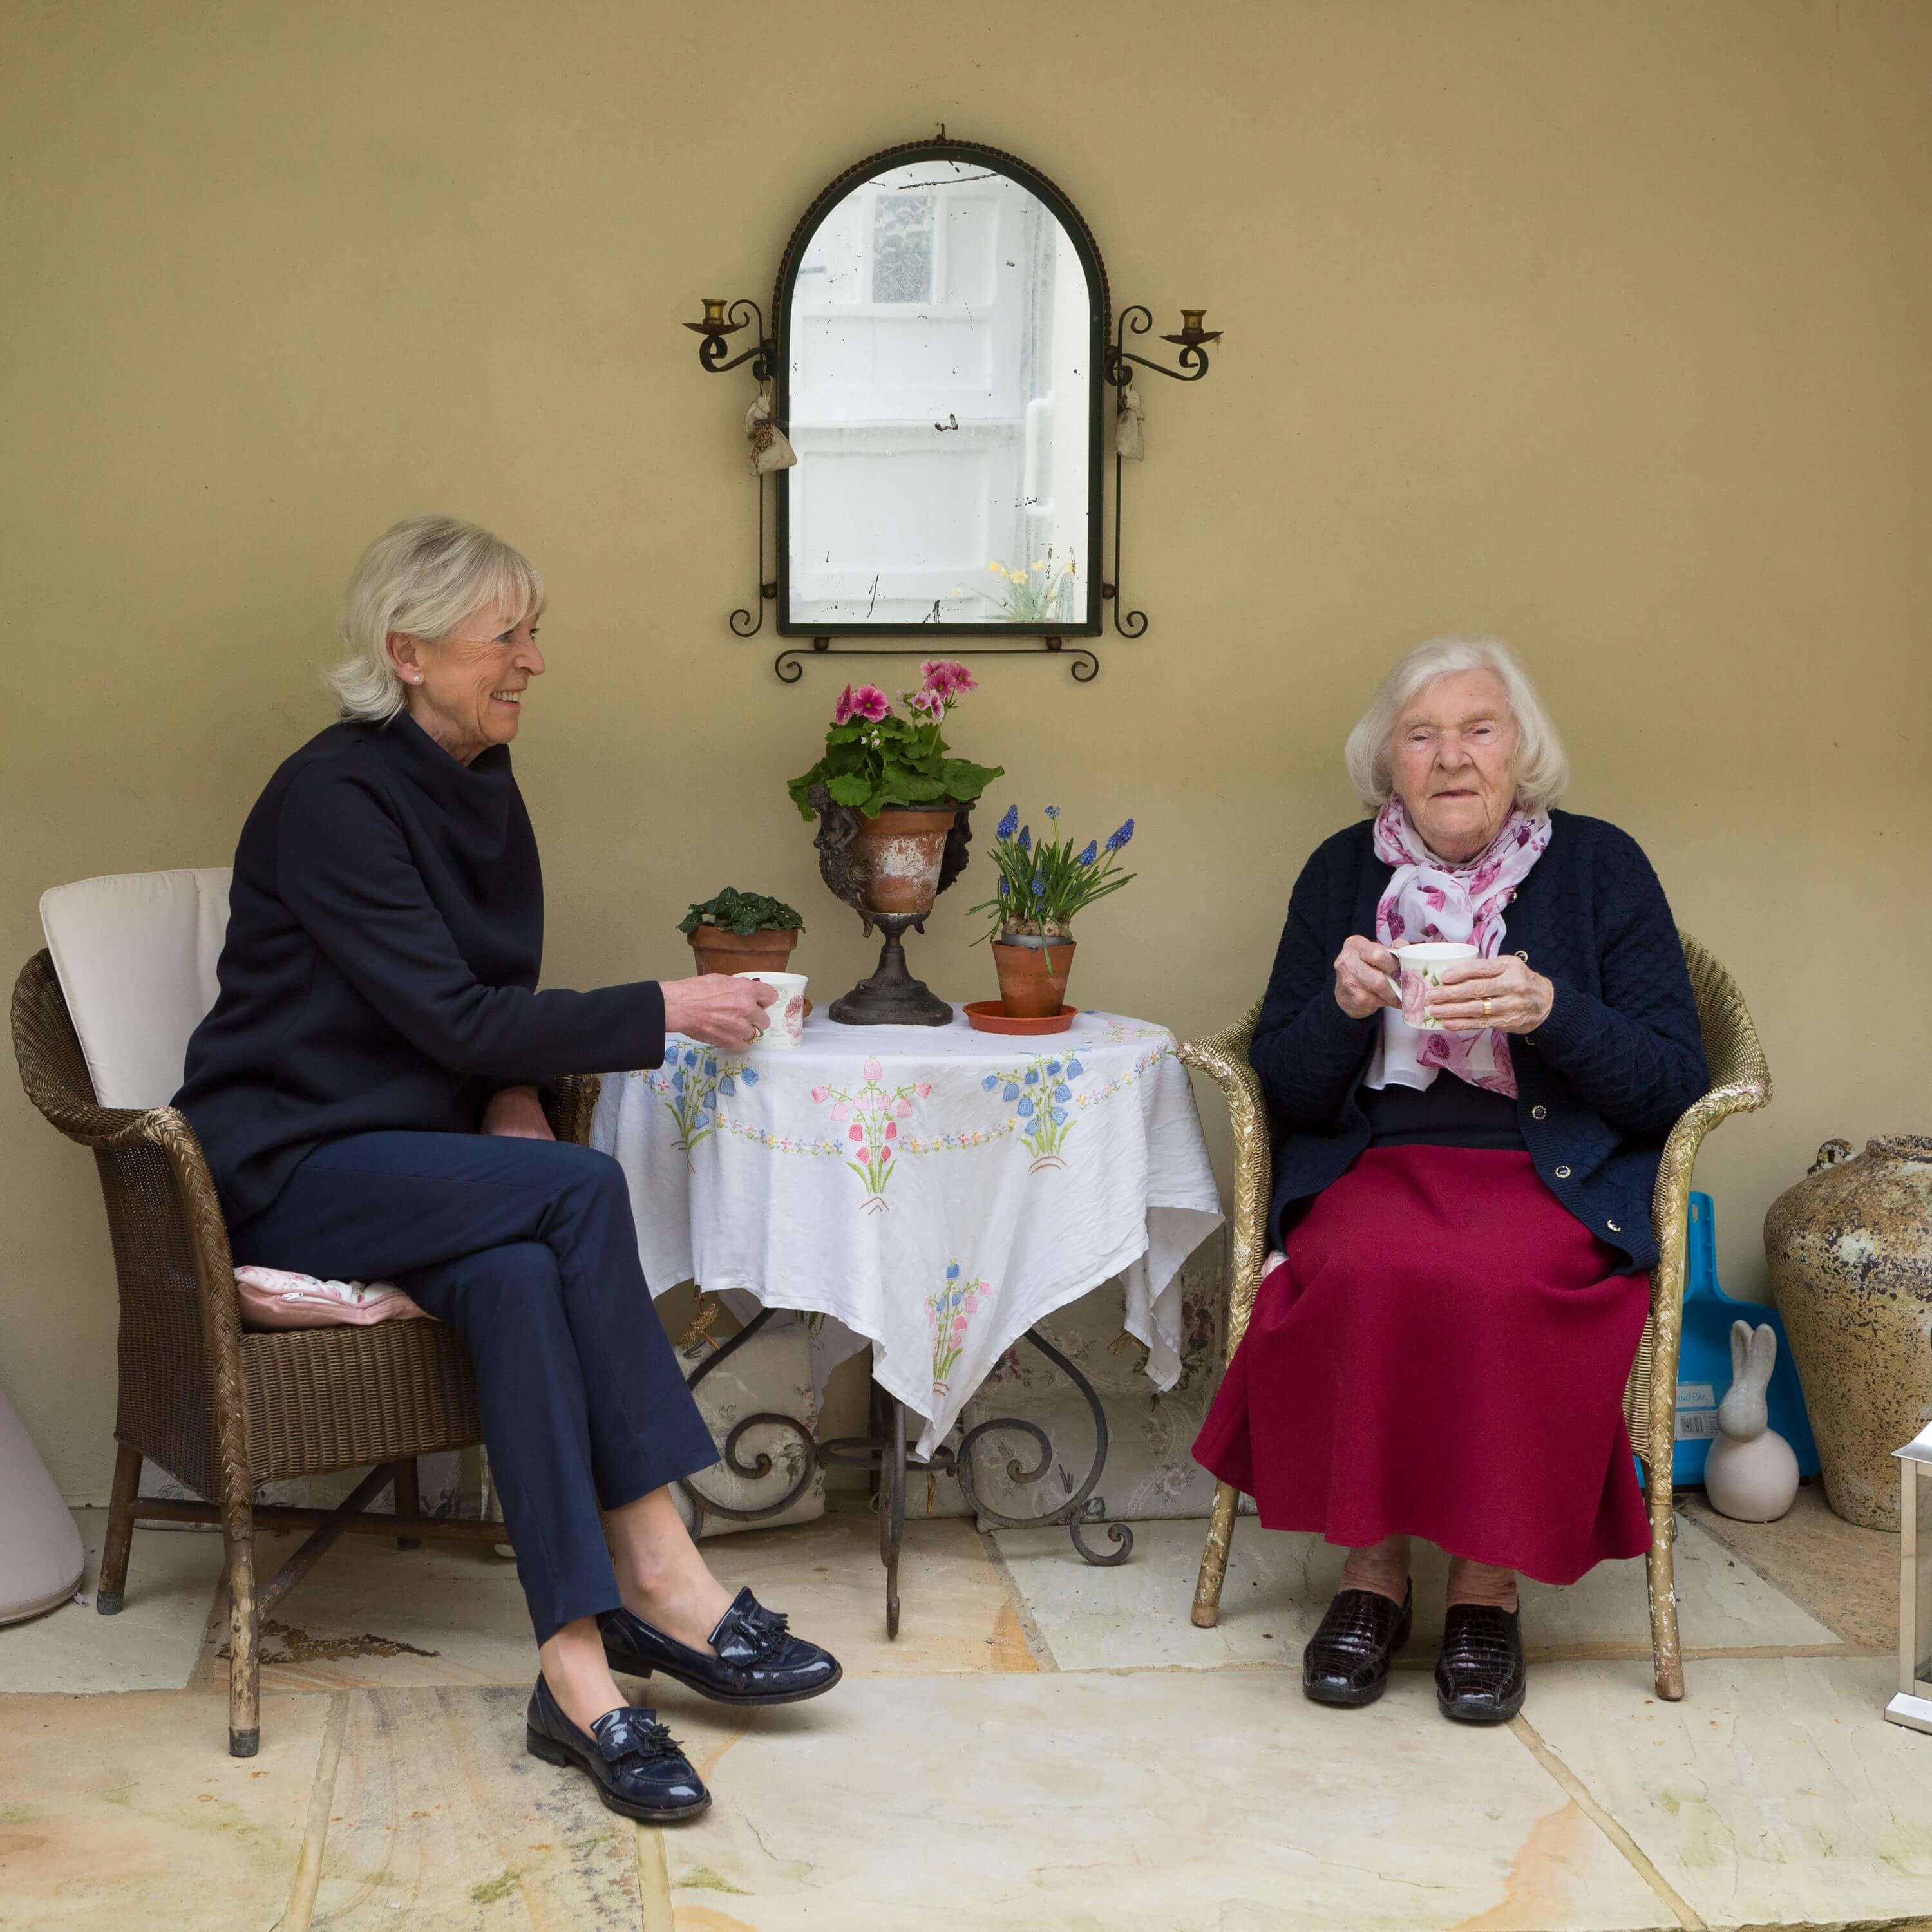 Wilhelmina, Day Hospice Patient and Norma, her daughter